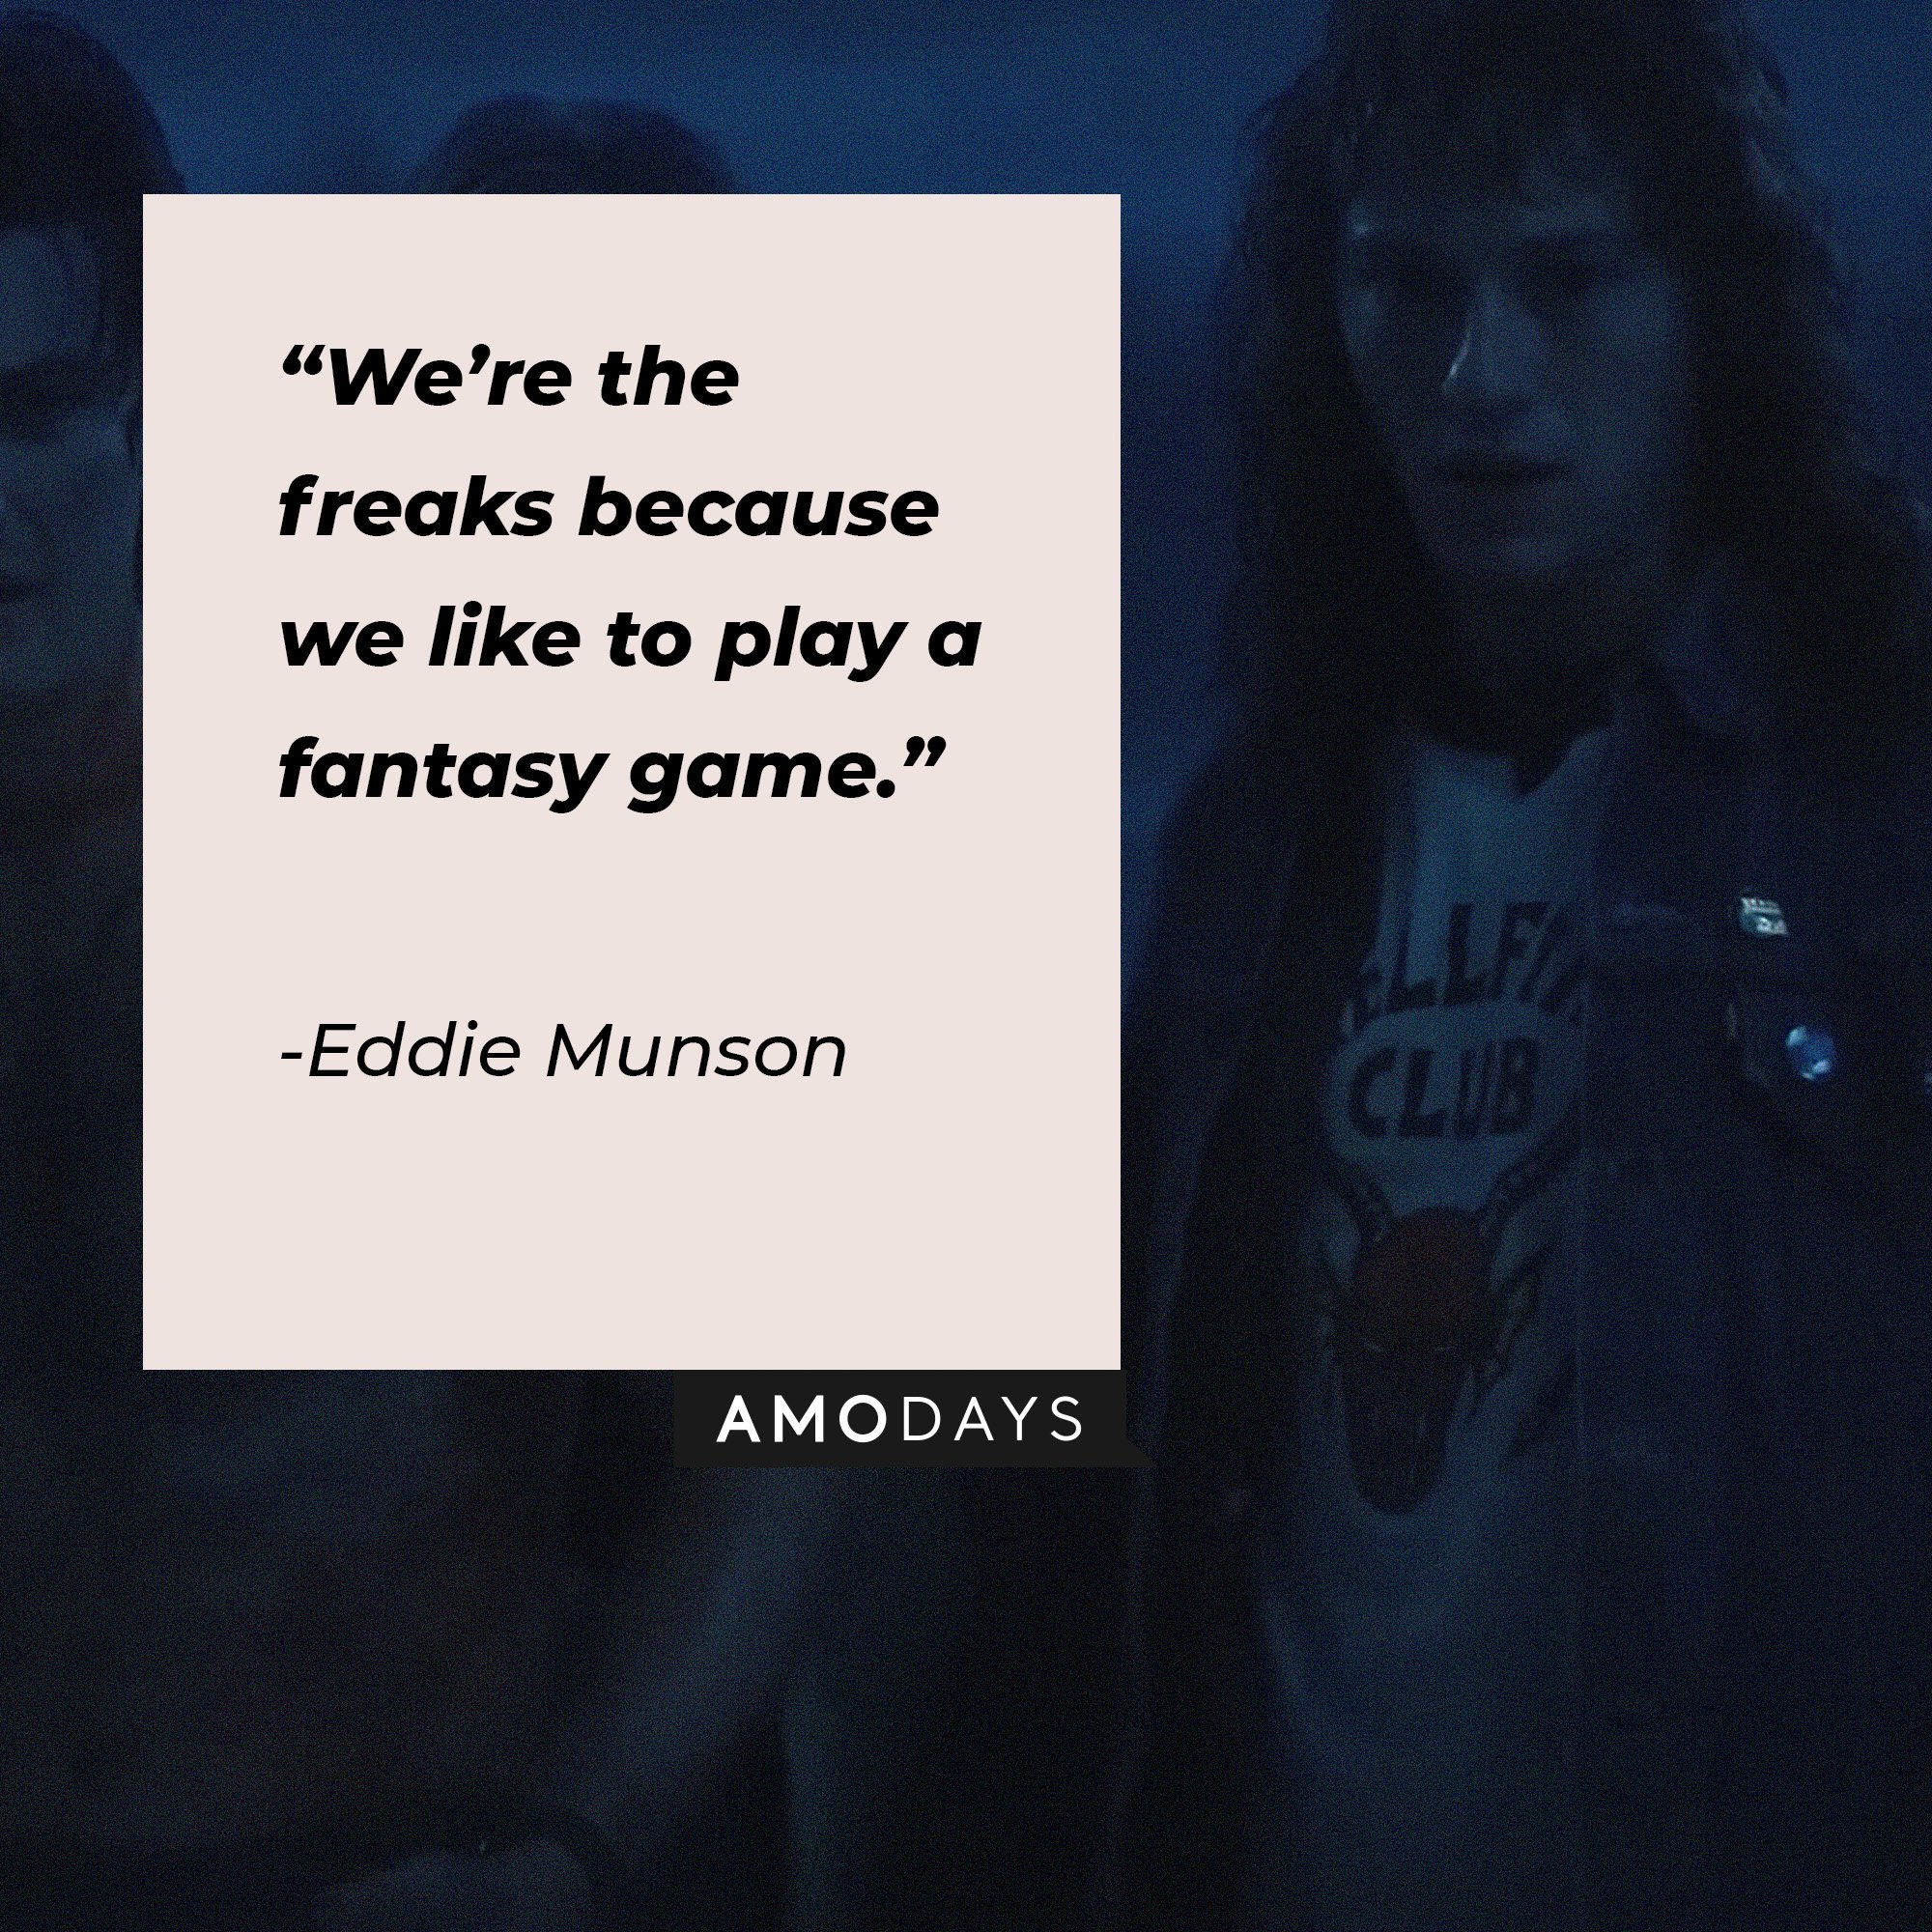 Eddie Munson’s quote: “We’re the freaks because we like to play a fantasy game.” | Image: AmoDays